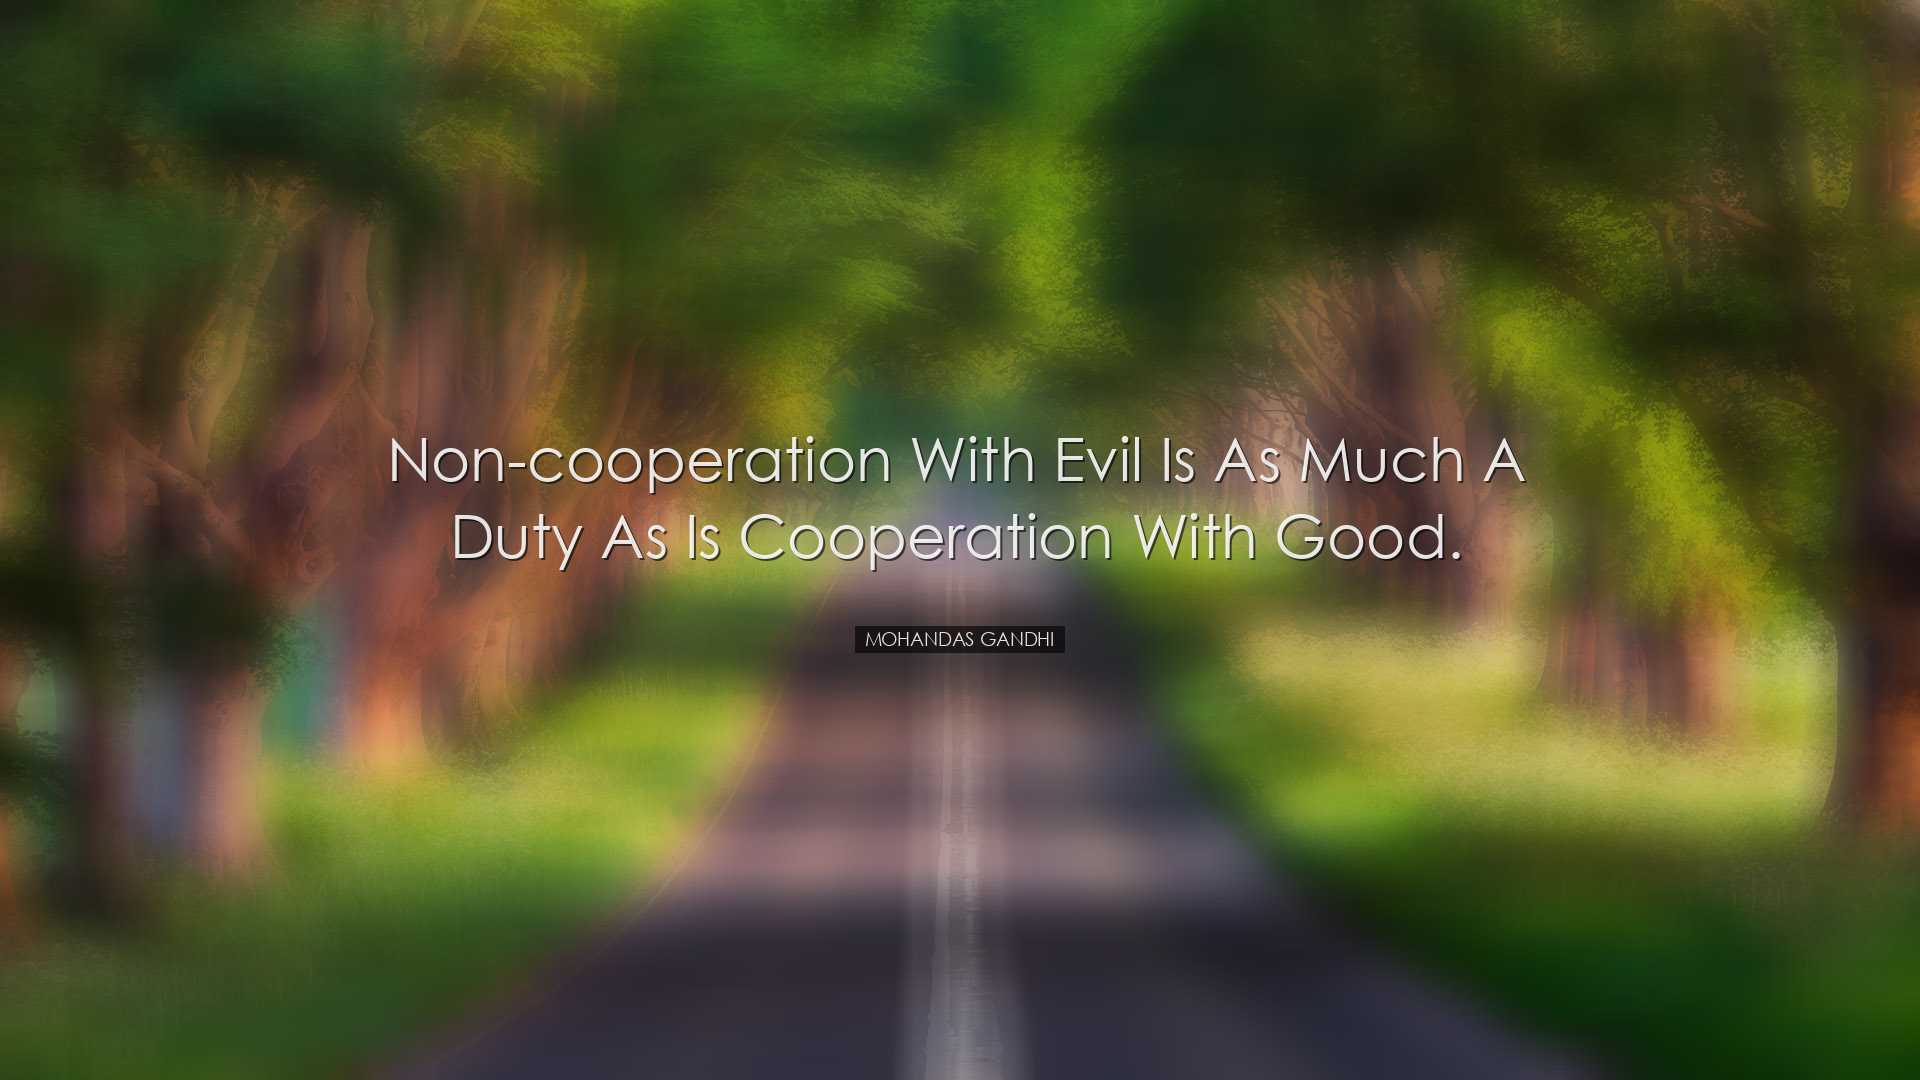 Non-cooperation with evil is as much a duty as is cooperation with